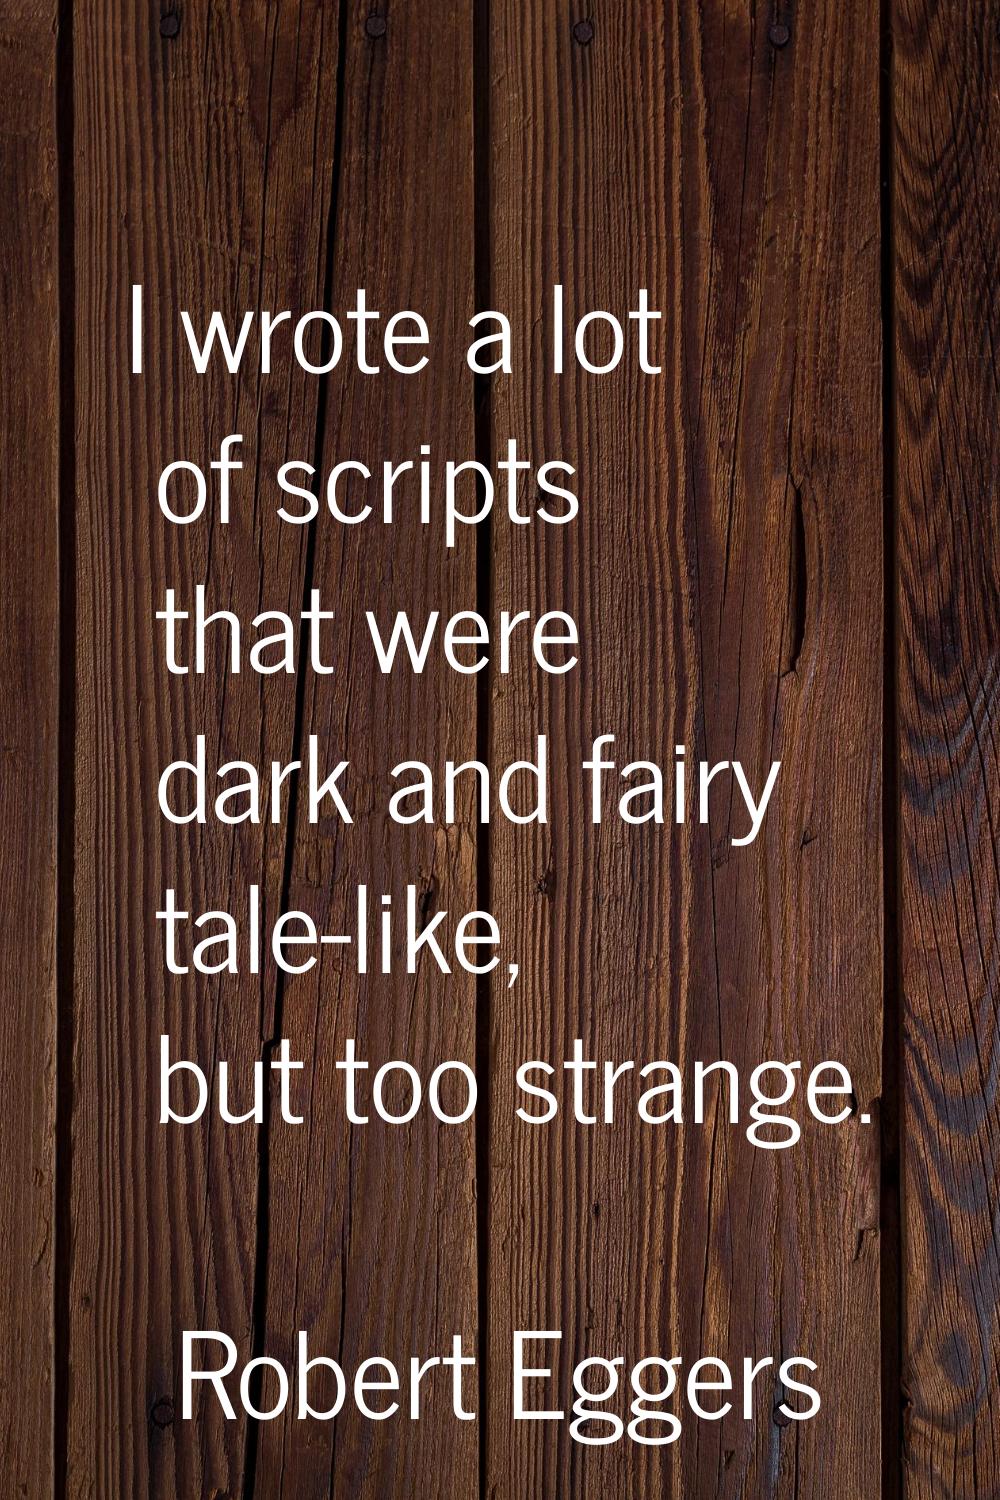 I wrote a lot of scripts that were dark and fairy tale-like, but too strange.